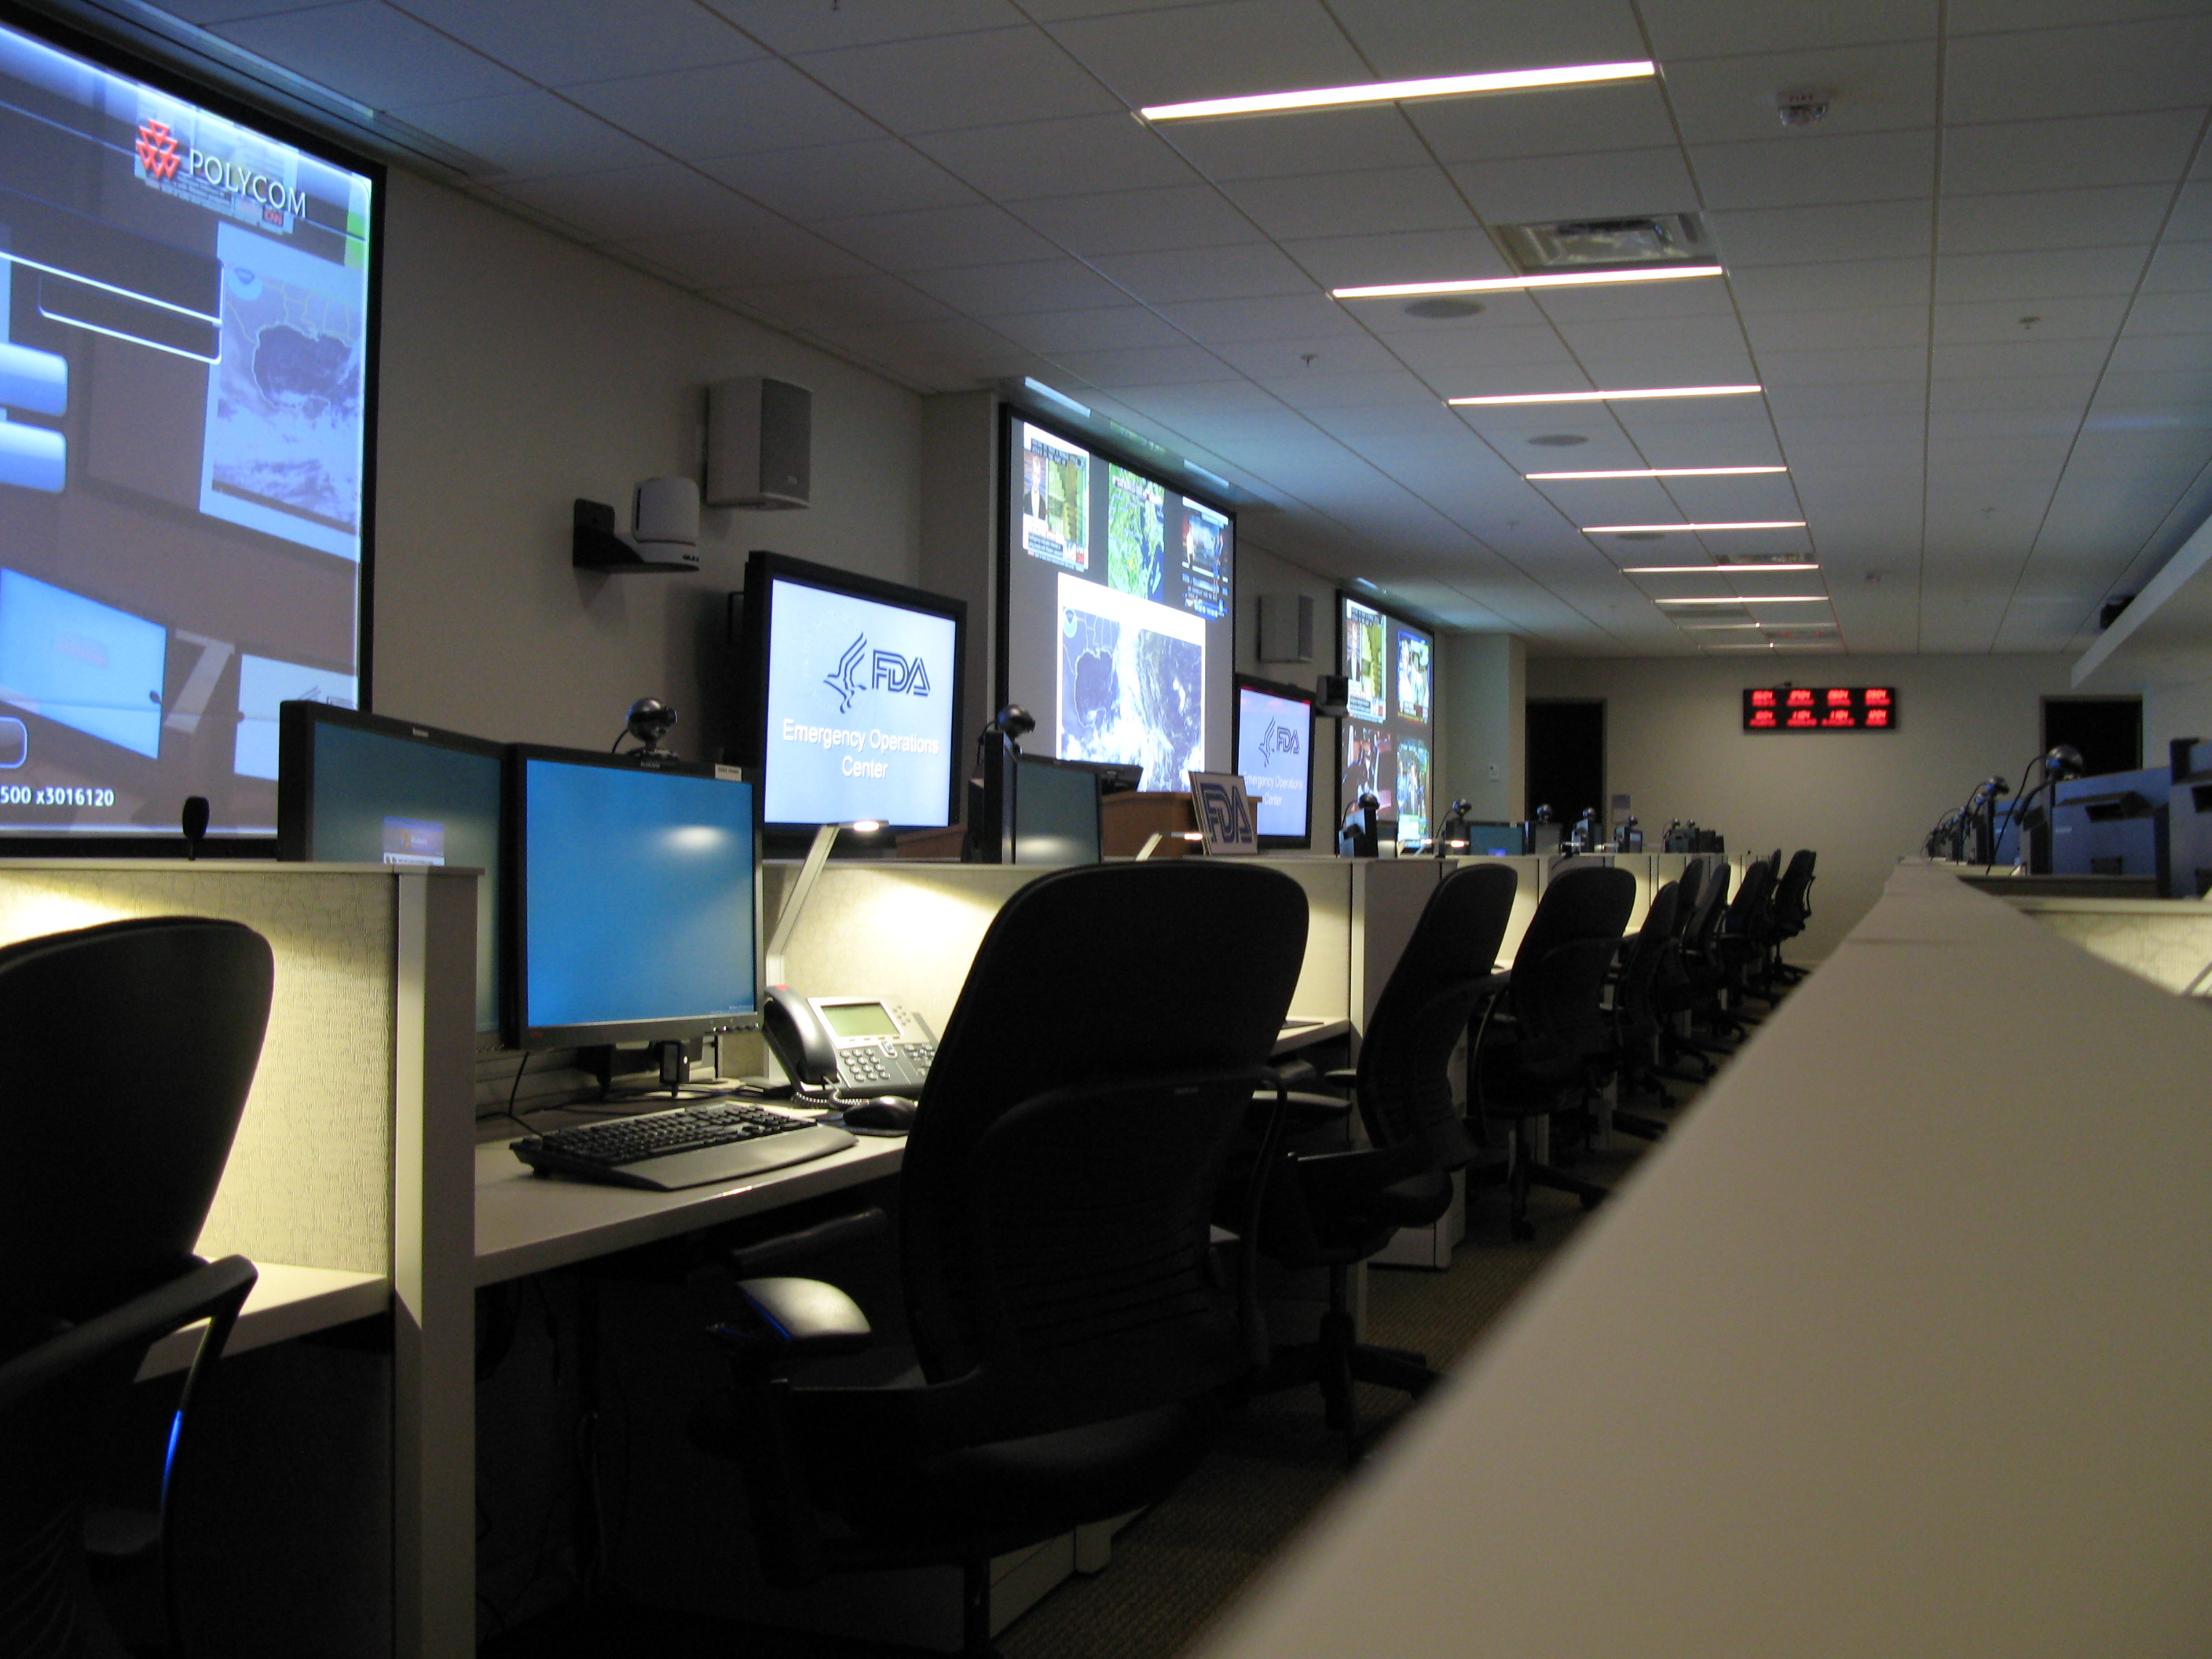 Front row of desks in the Emergency Operations Center